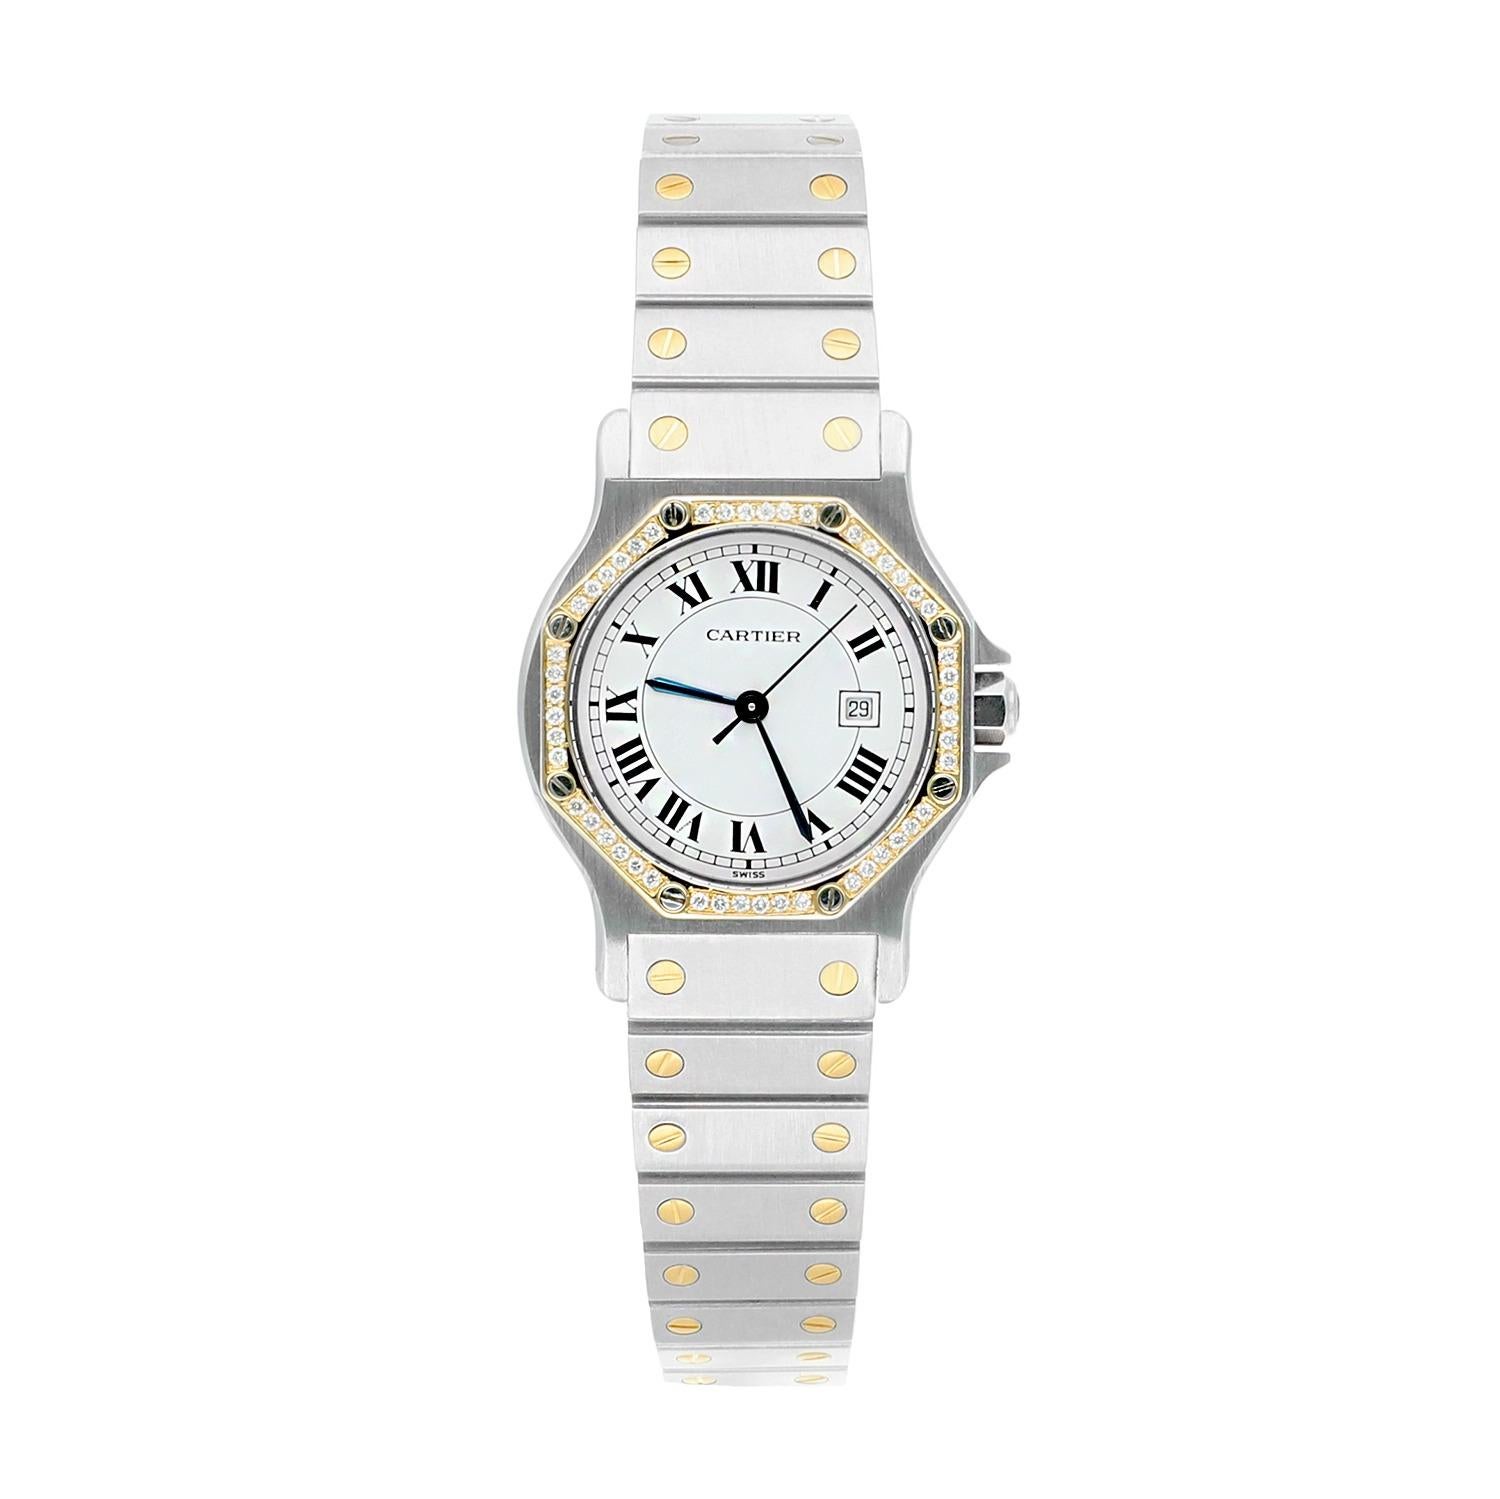 Cartier Santos Octagon 29mm Women's Watch with Diamond Bezel 187902
This watch has been professionally polished, serviced and is in excellent overall condition. There are absolutely no visible scratches or blemishes. Diamonds were custom set, 100%